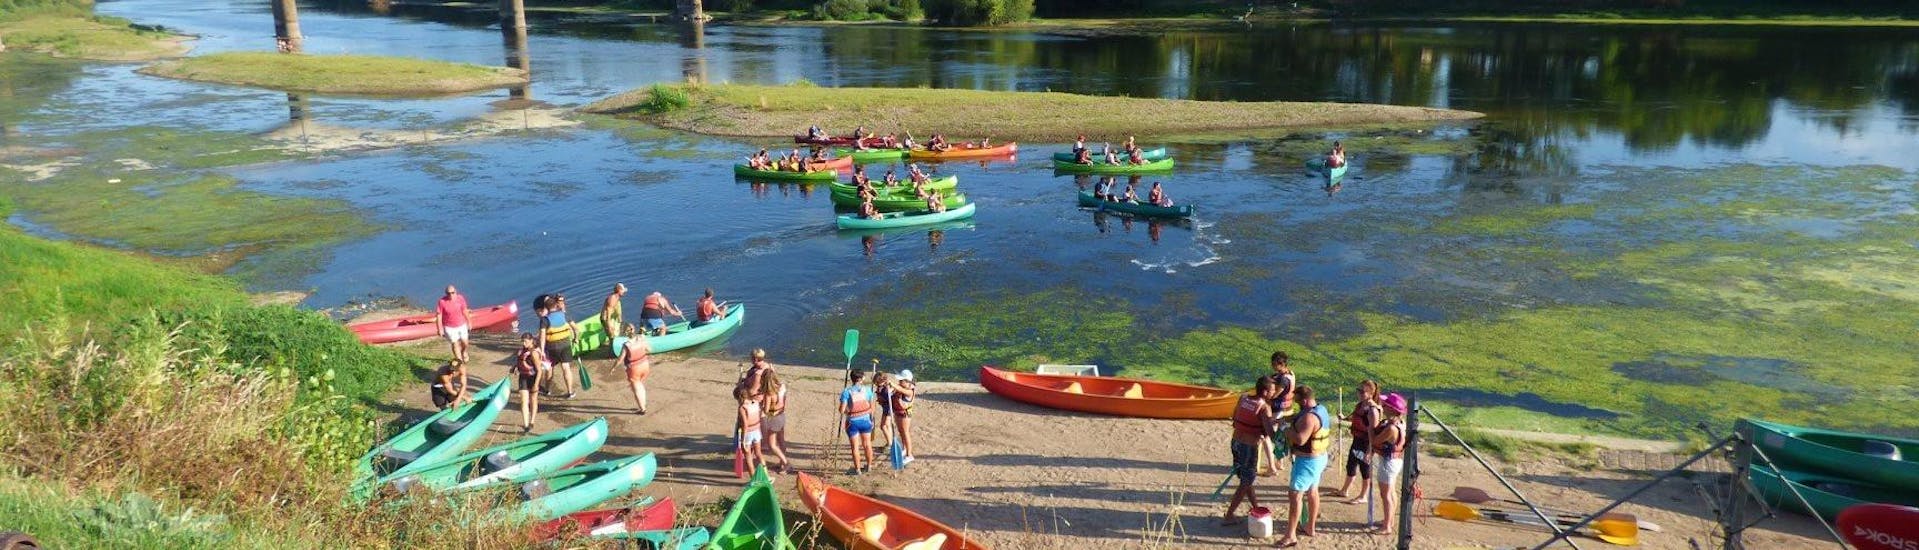 Holidaymakers are getting into the water for their 4km Canoe Rental on the Dordogne for Families with Canoe Kayak Port-Sainte-Foy.